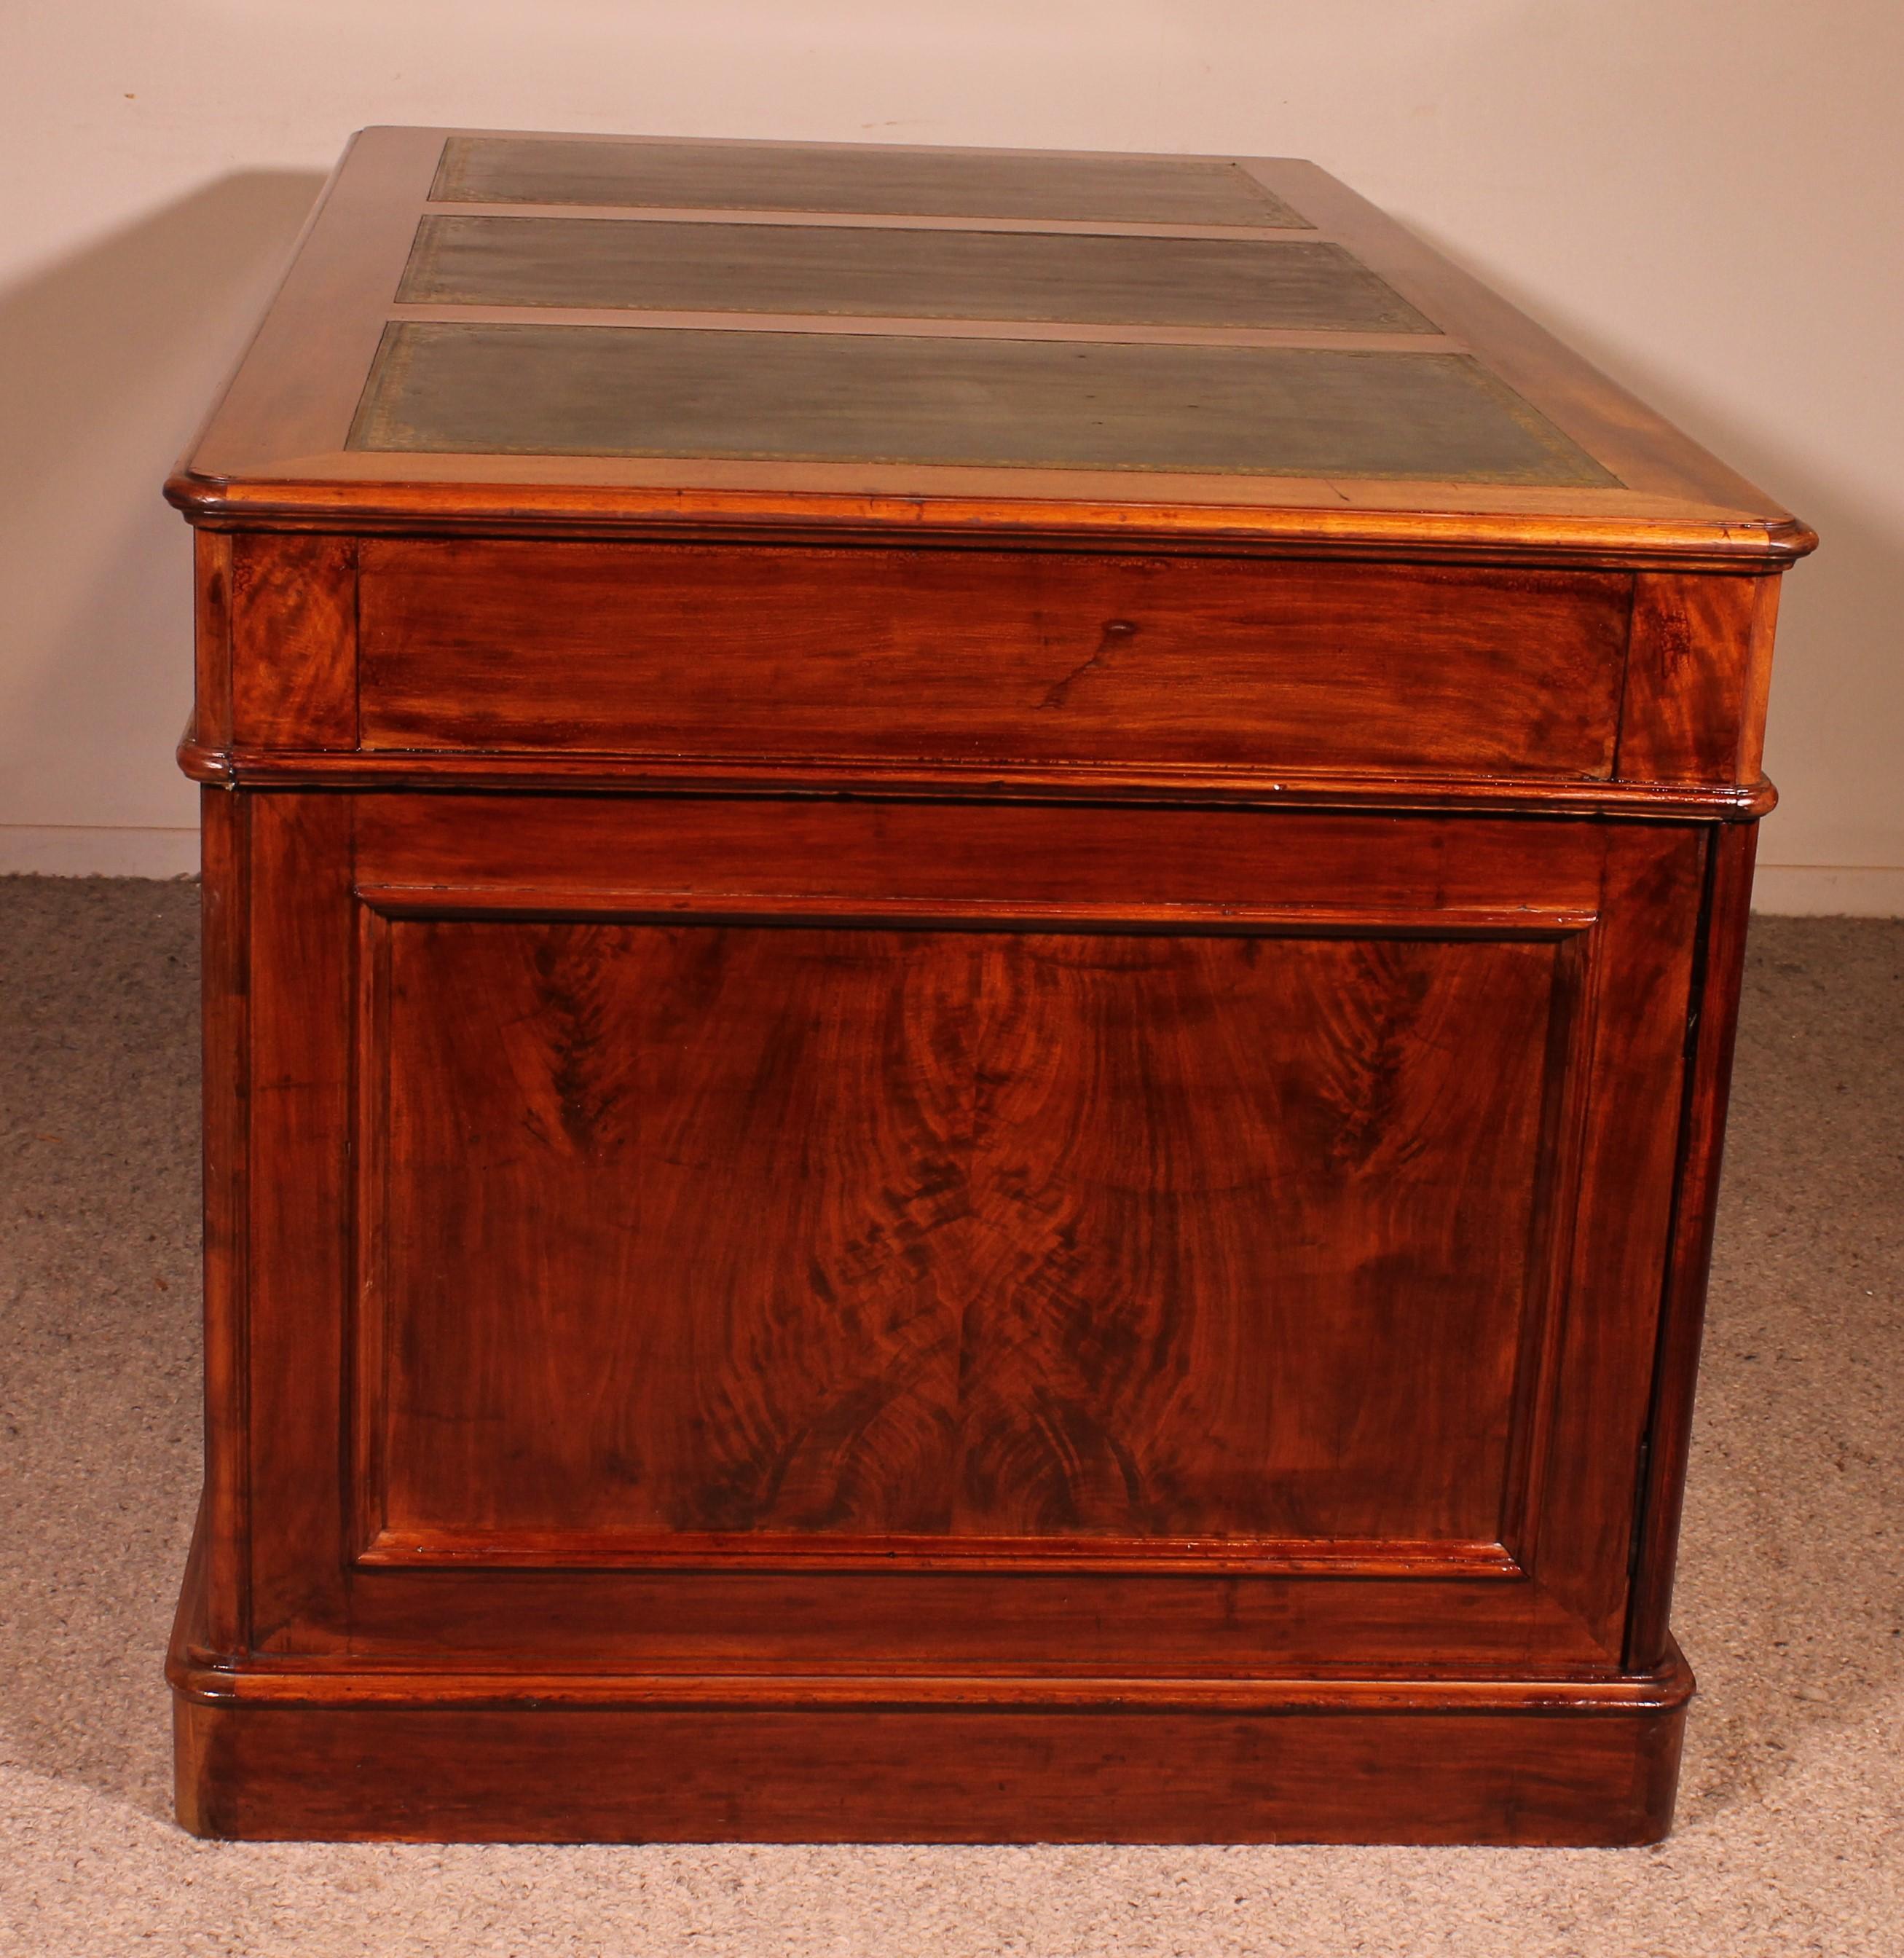 Large Pedestal Desk In Mahogany From The 19th Century For Sale 5